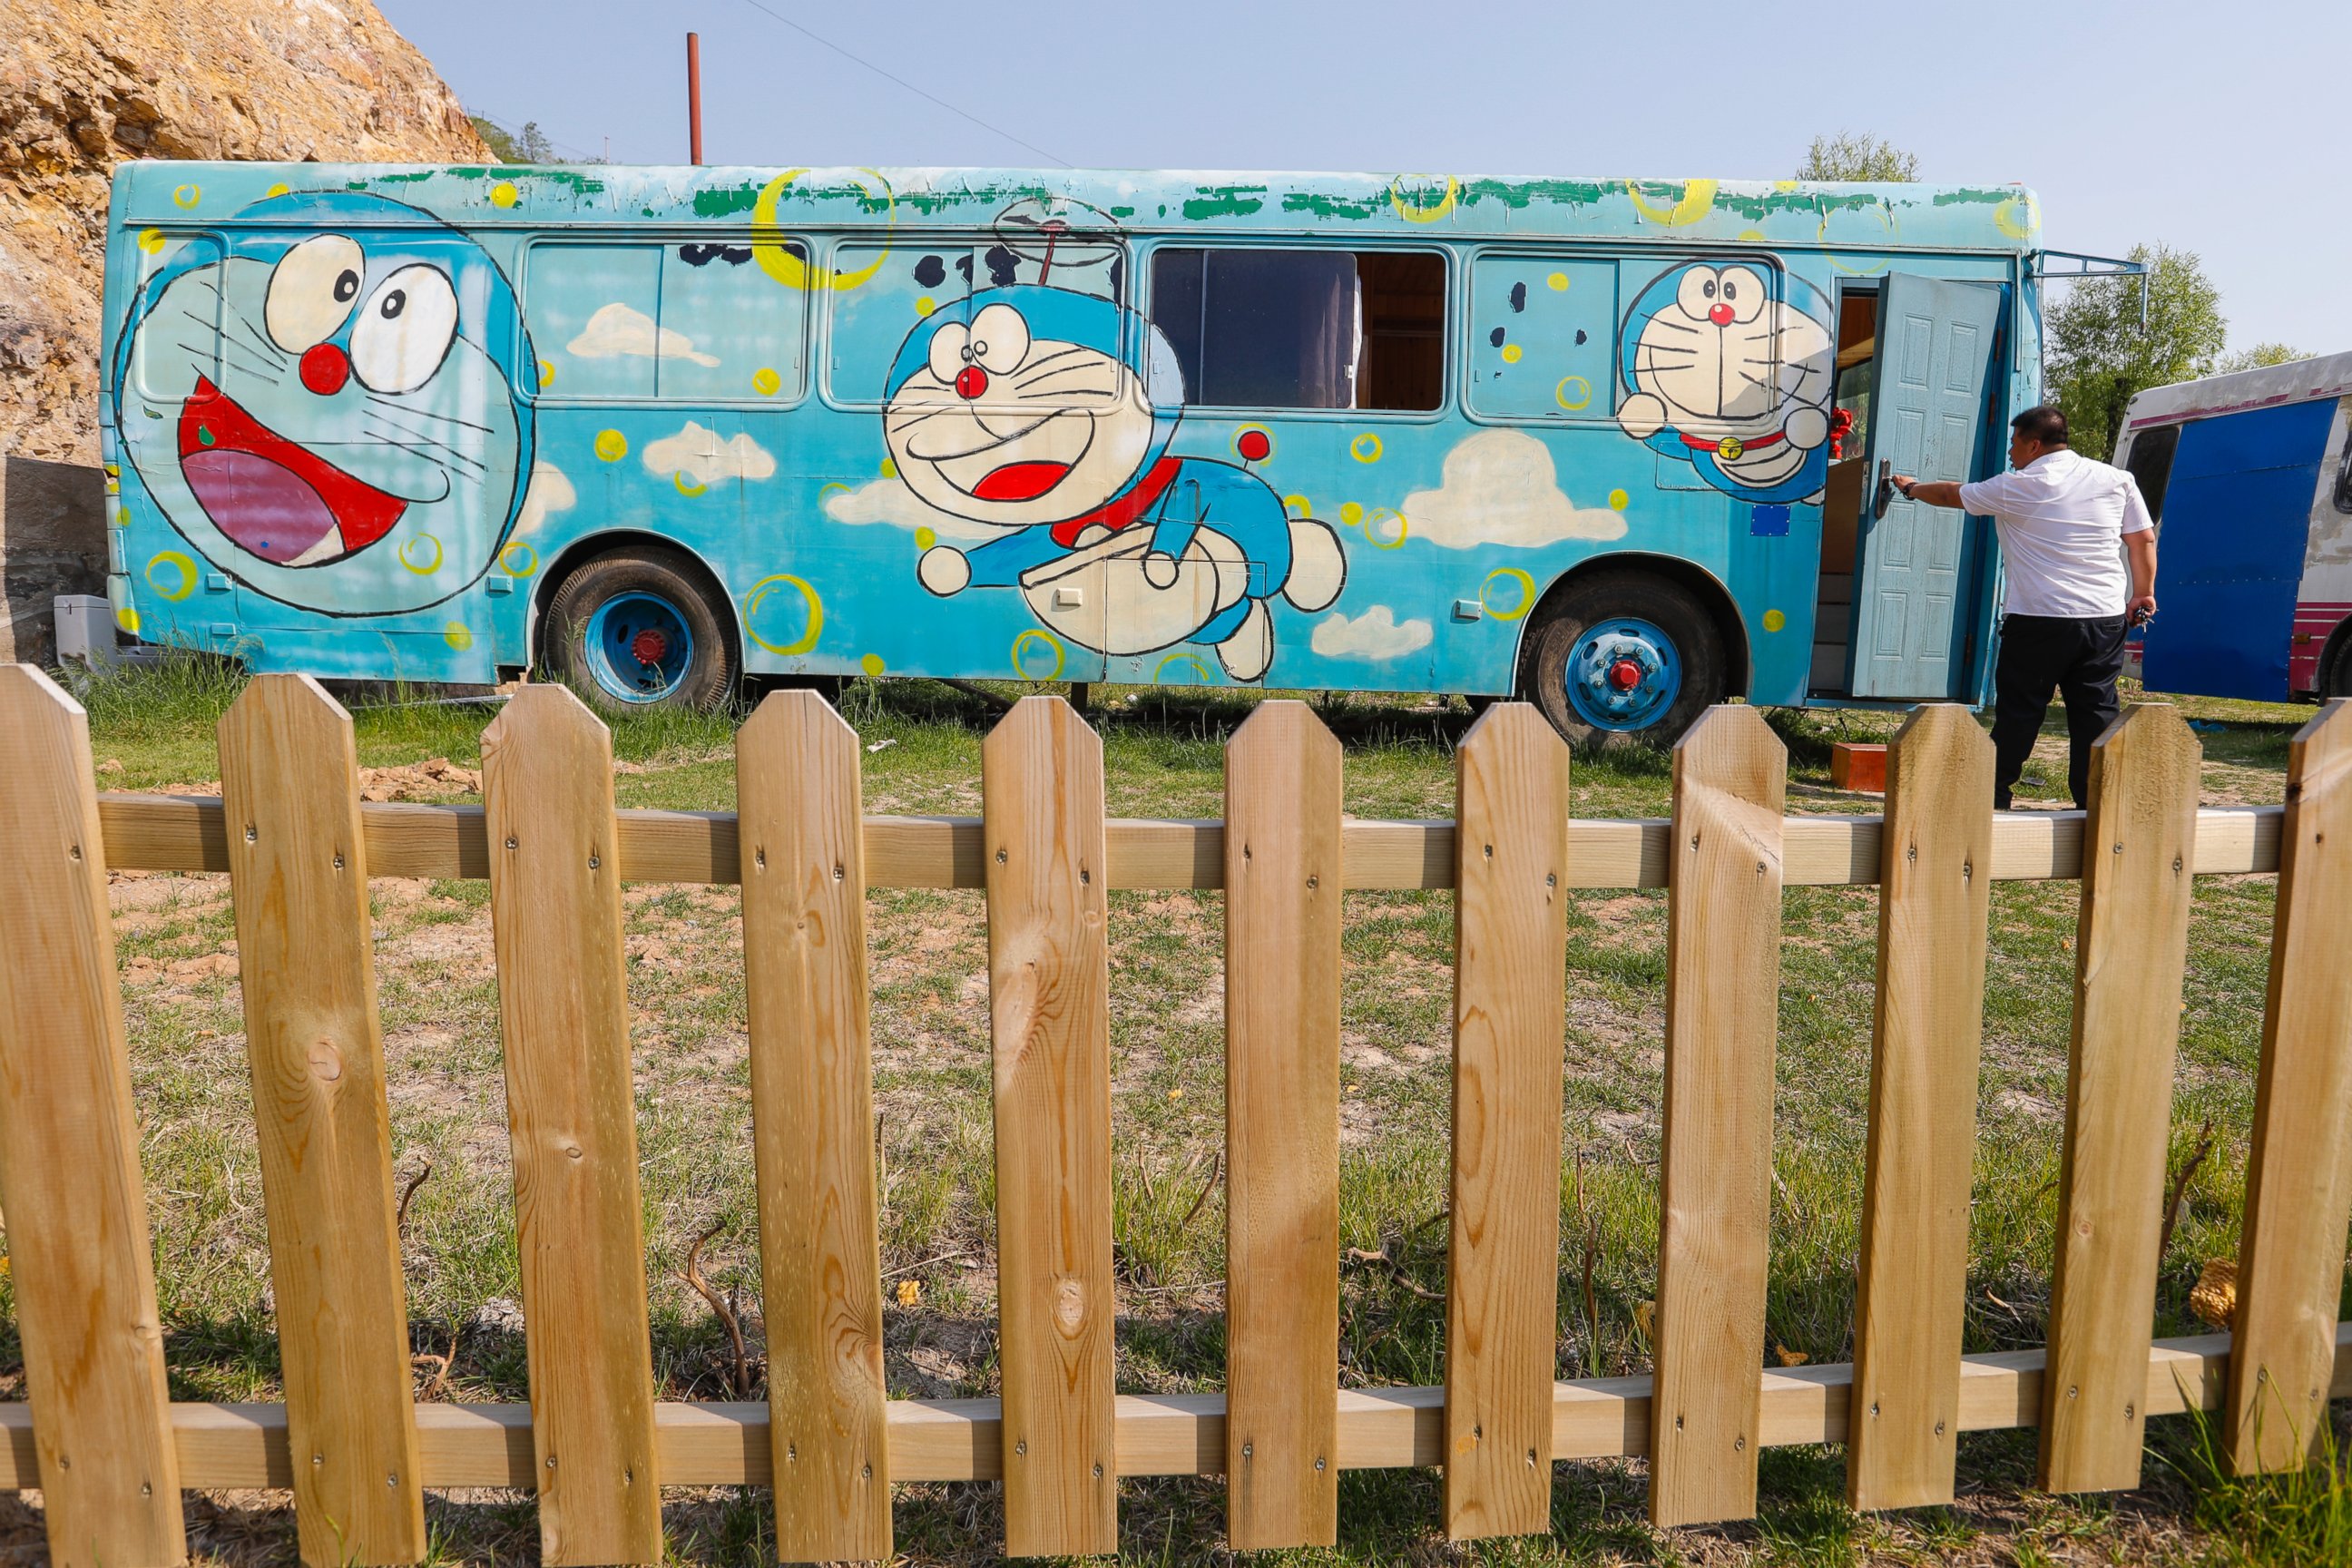 PHOTO: The external decoration of Doraemon themed recreational vehicles at a resort, May 29, 2016, in Taiyuan, China. 